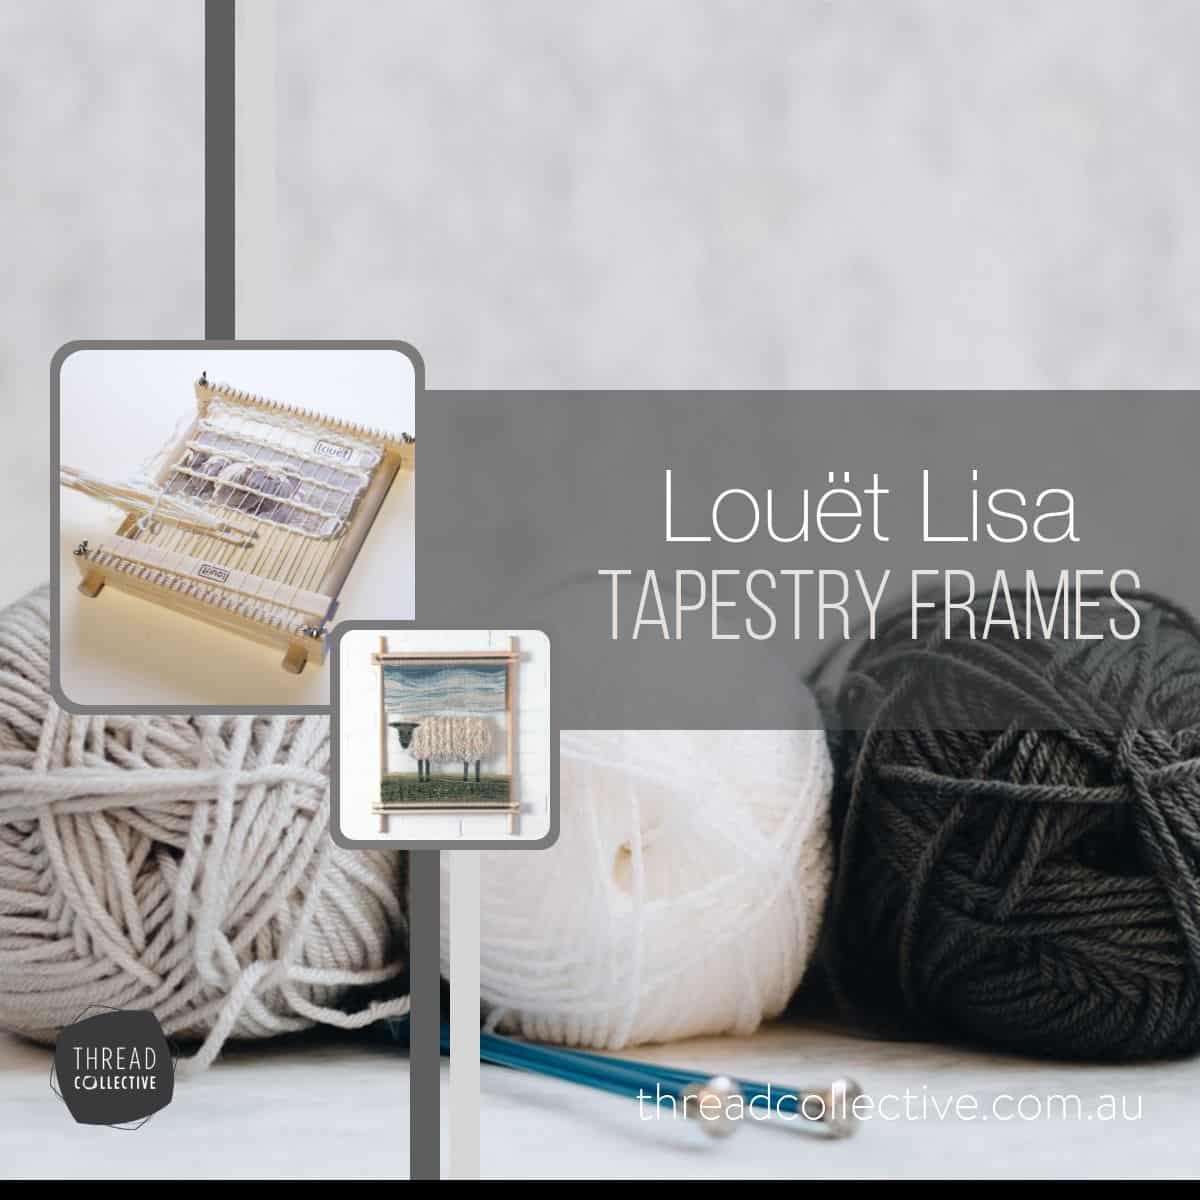 Get creative with Louët Lisa tapestry frames